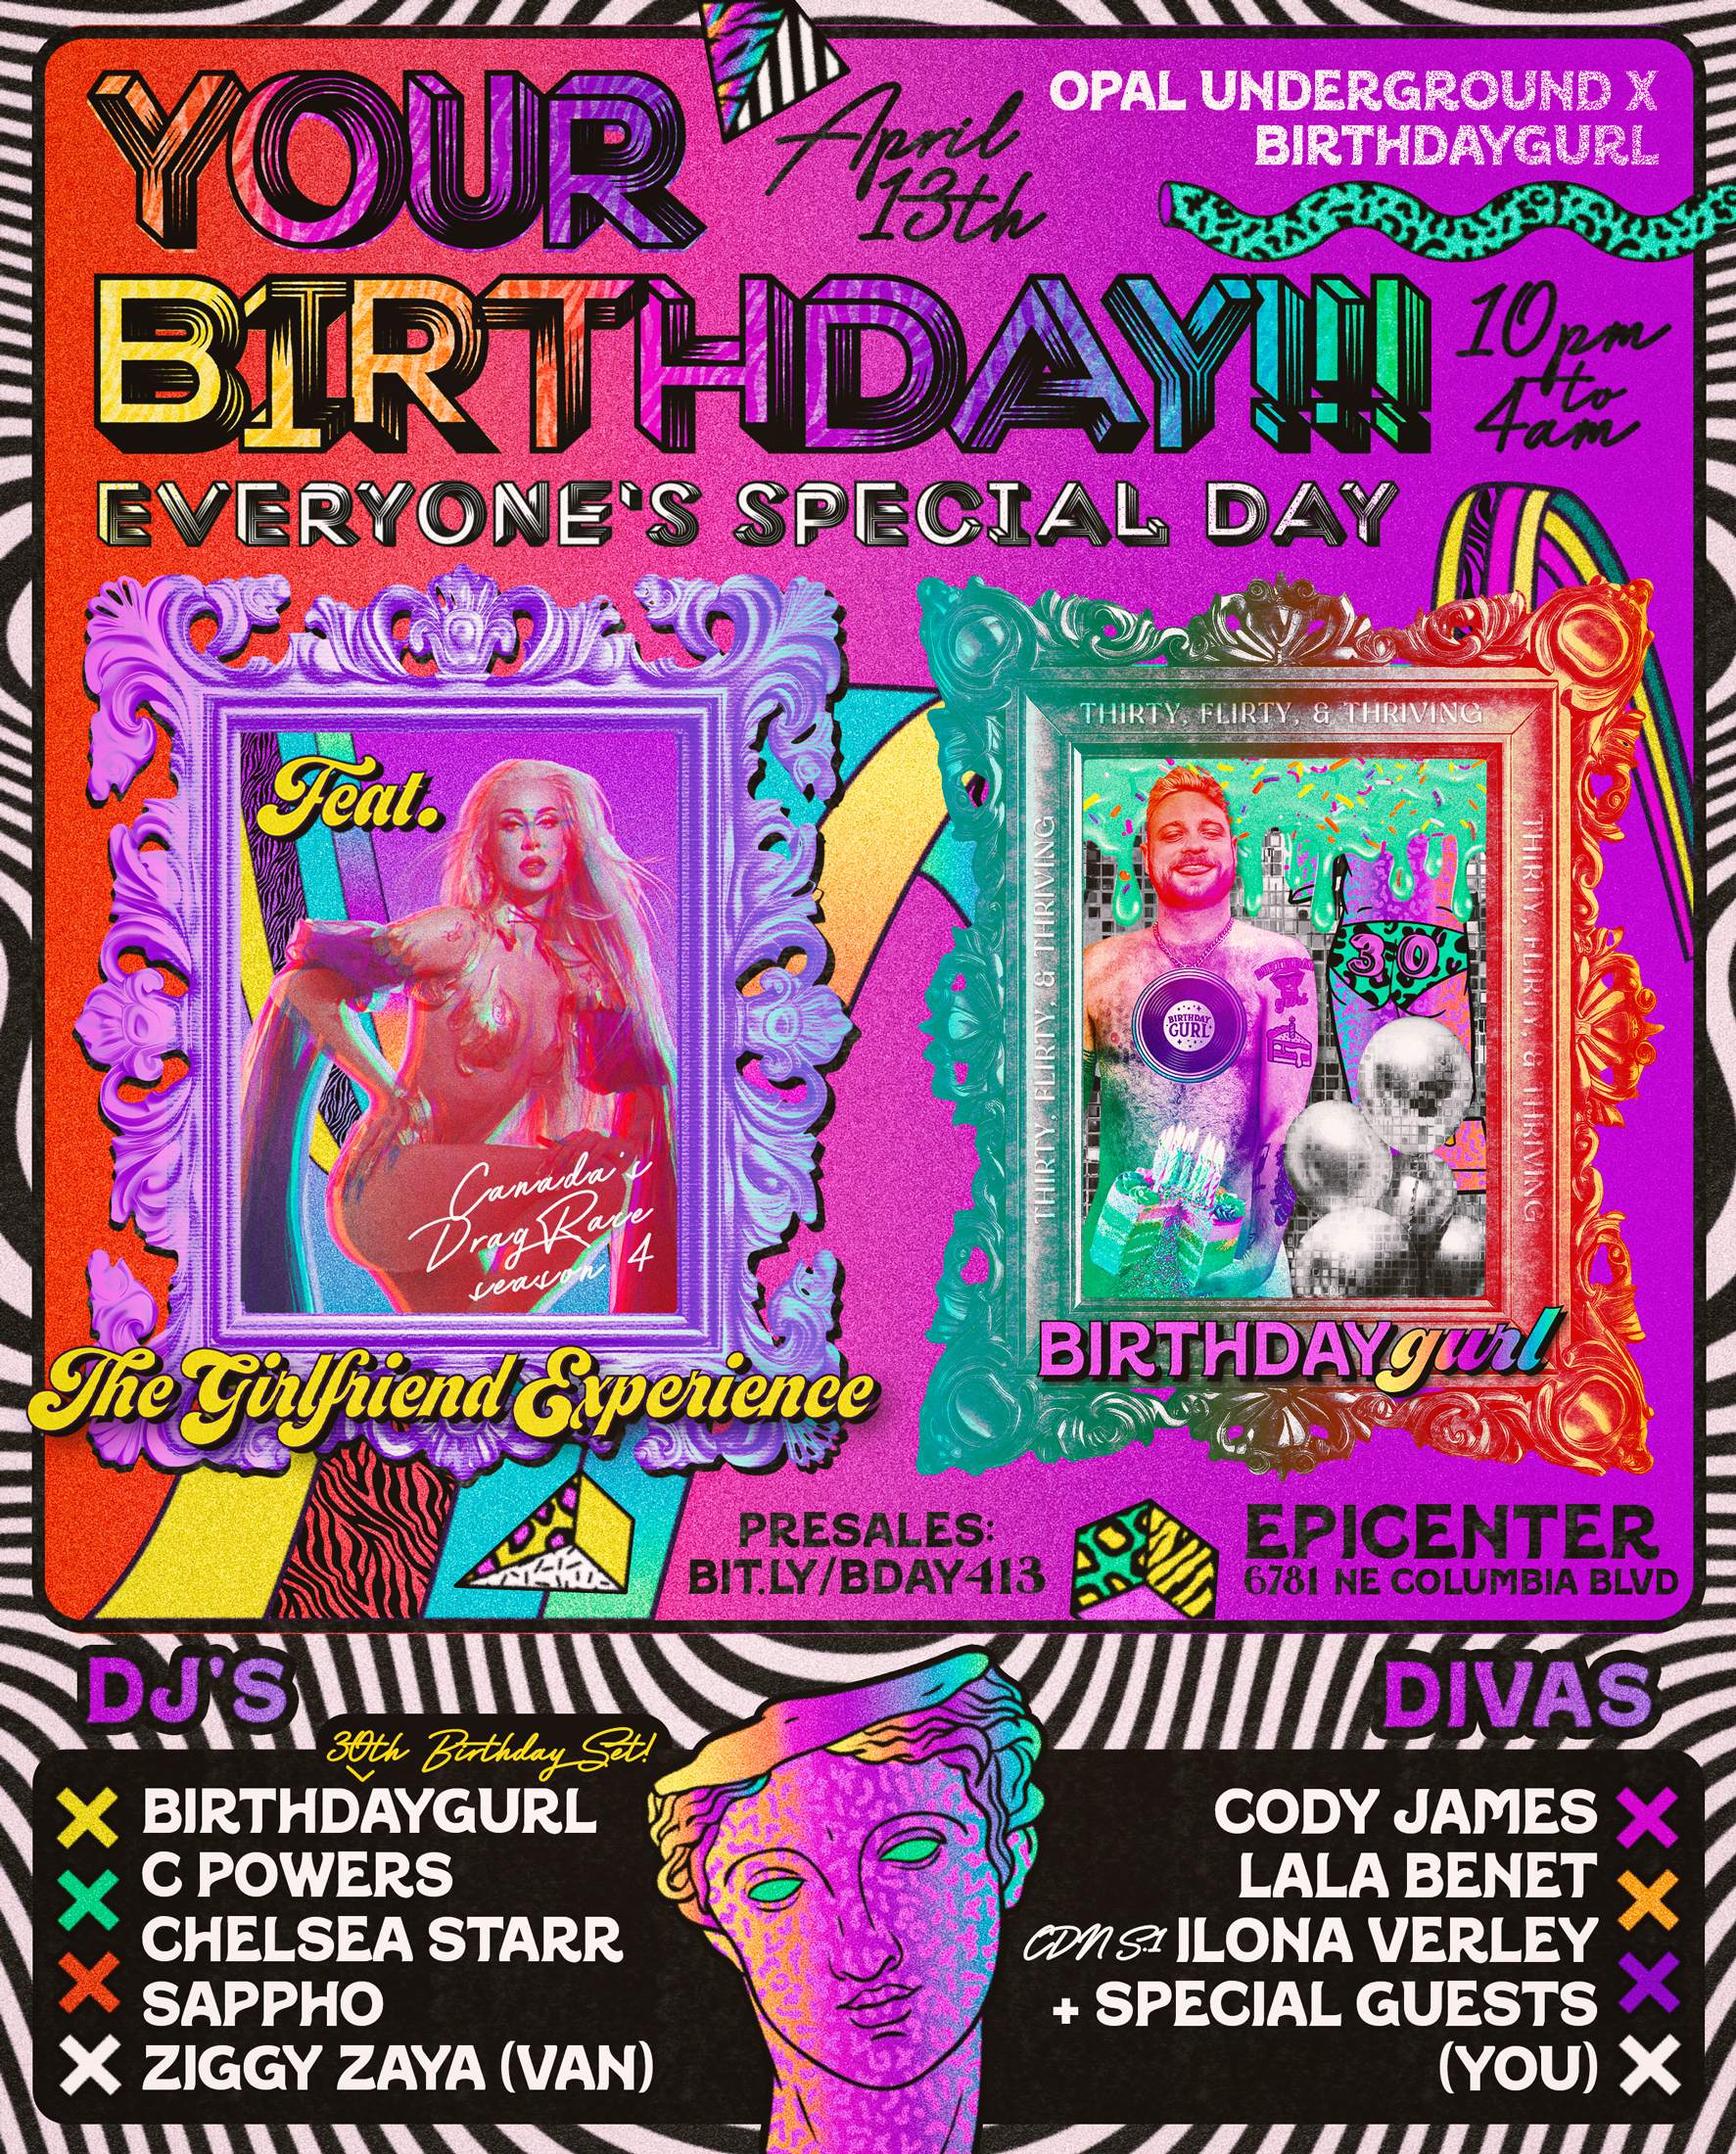 Your Birthday! Everyone's Special Day featuring The Girlfriend Experience - Página frontal